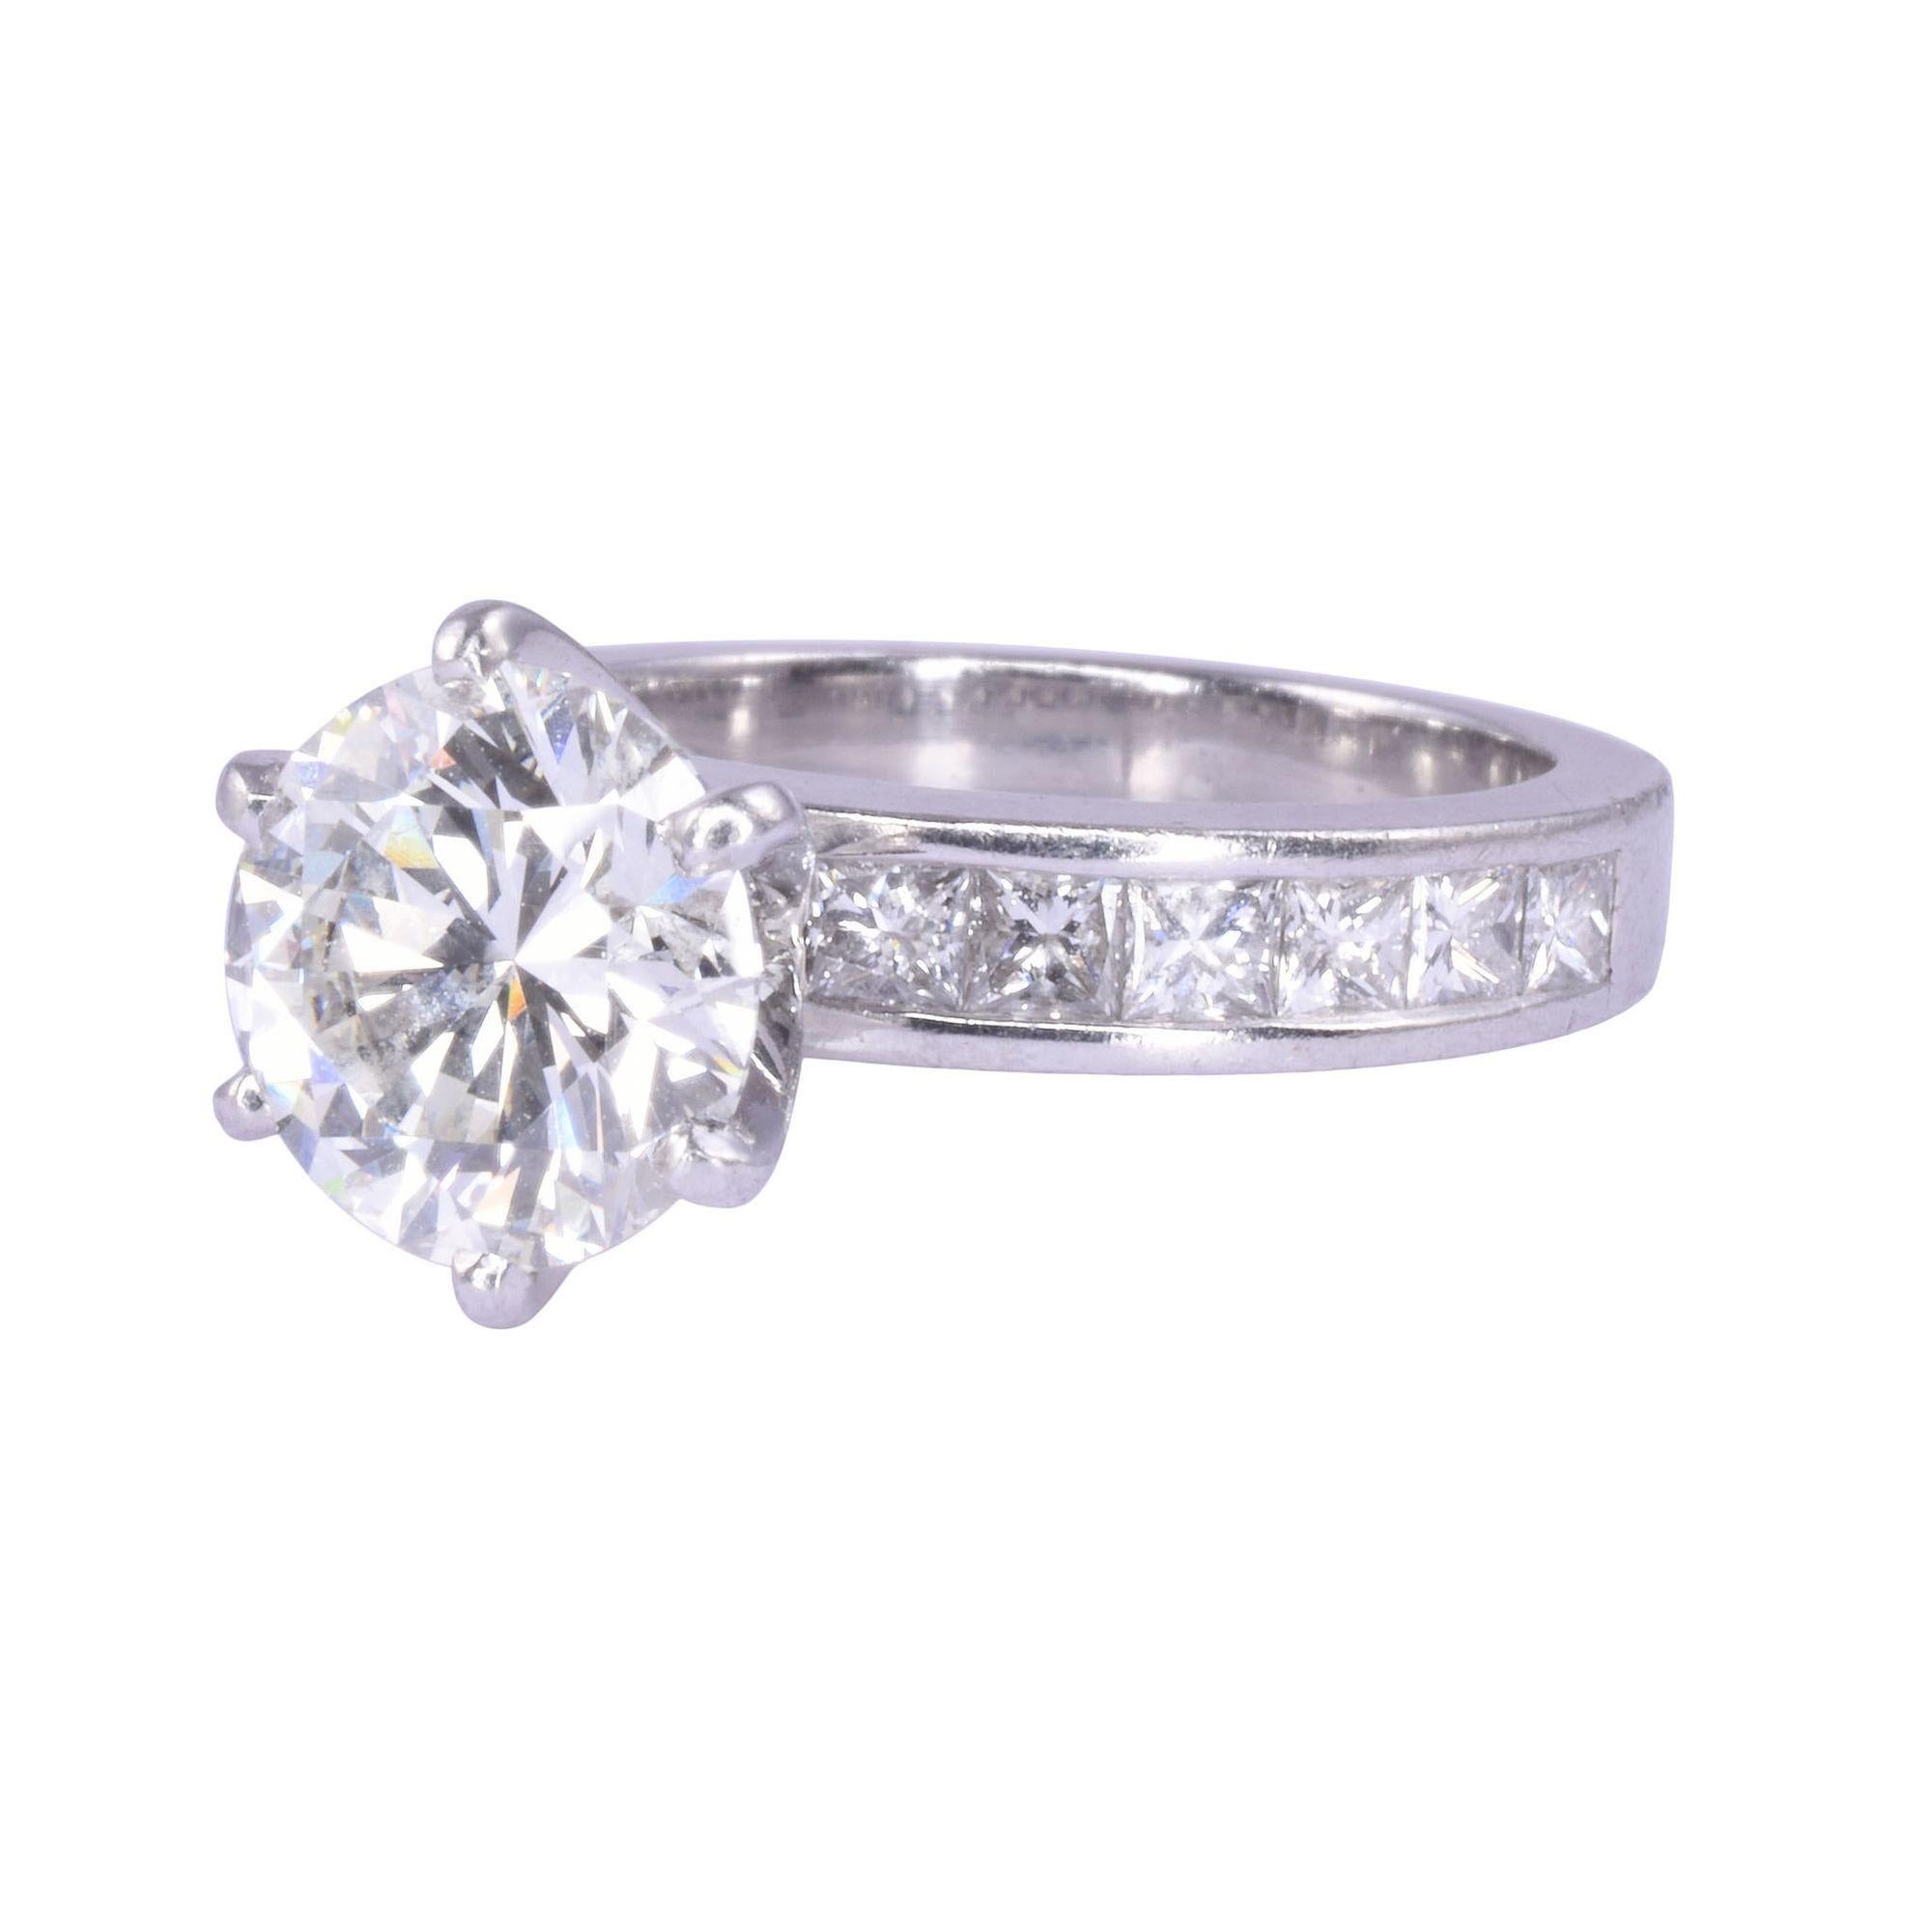 Estate GIA certified 2.06 carat diamond center engagement ring. This platinum engagement rings boasts a 2.06 carat center diamond GIA certified and laser inscribed 1106904878. The diamond has VS1 clarity and K color with no fluorescence. There are